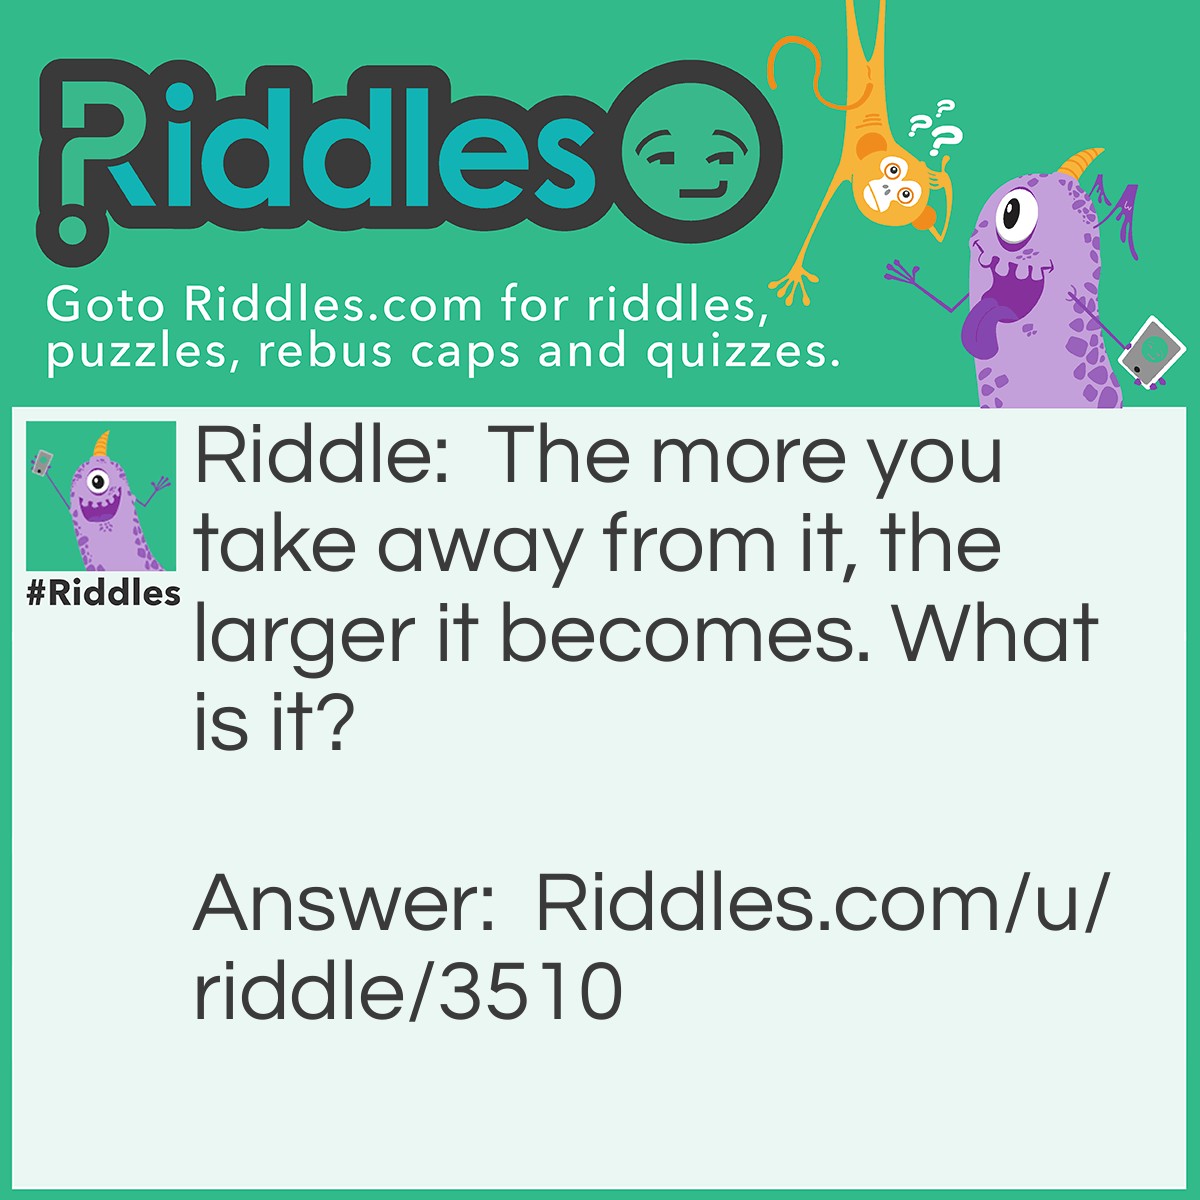 Riddle: The more you take away from it, the larger it becomes. What is it? Answer: A hole.